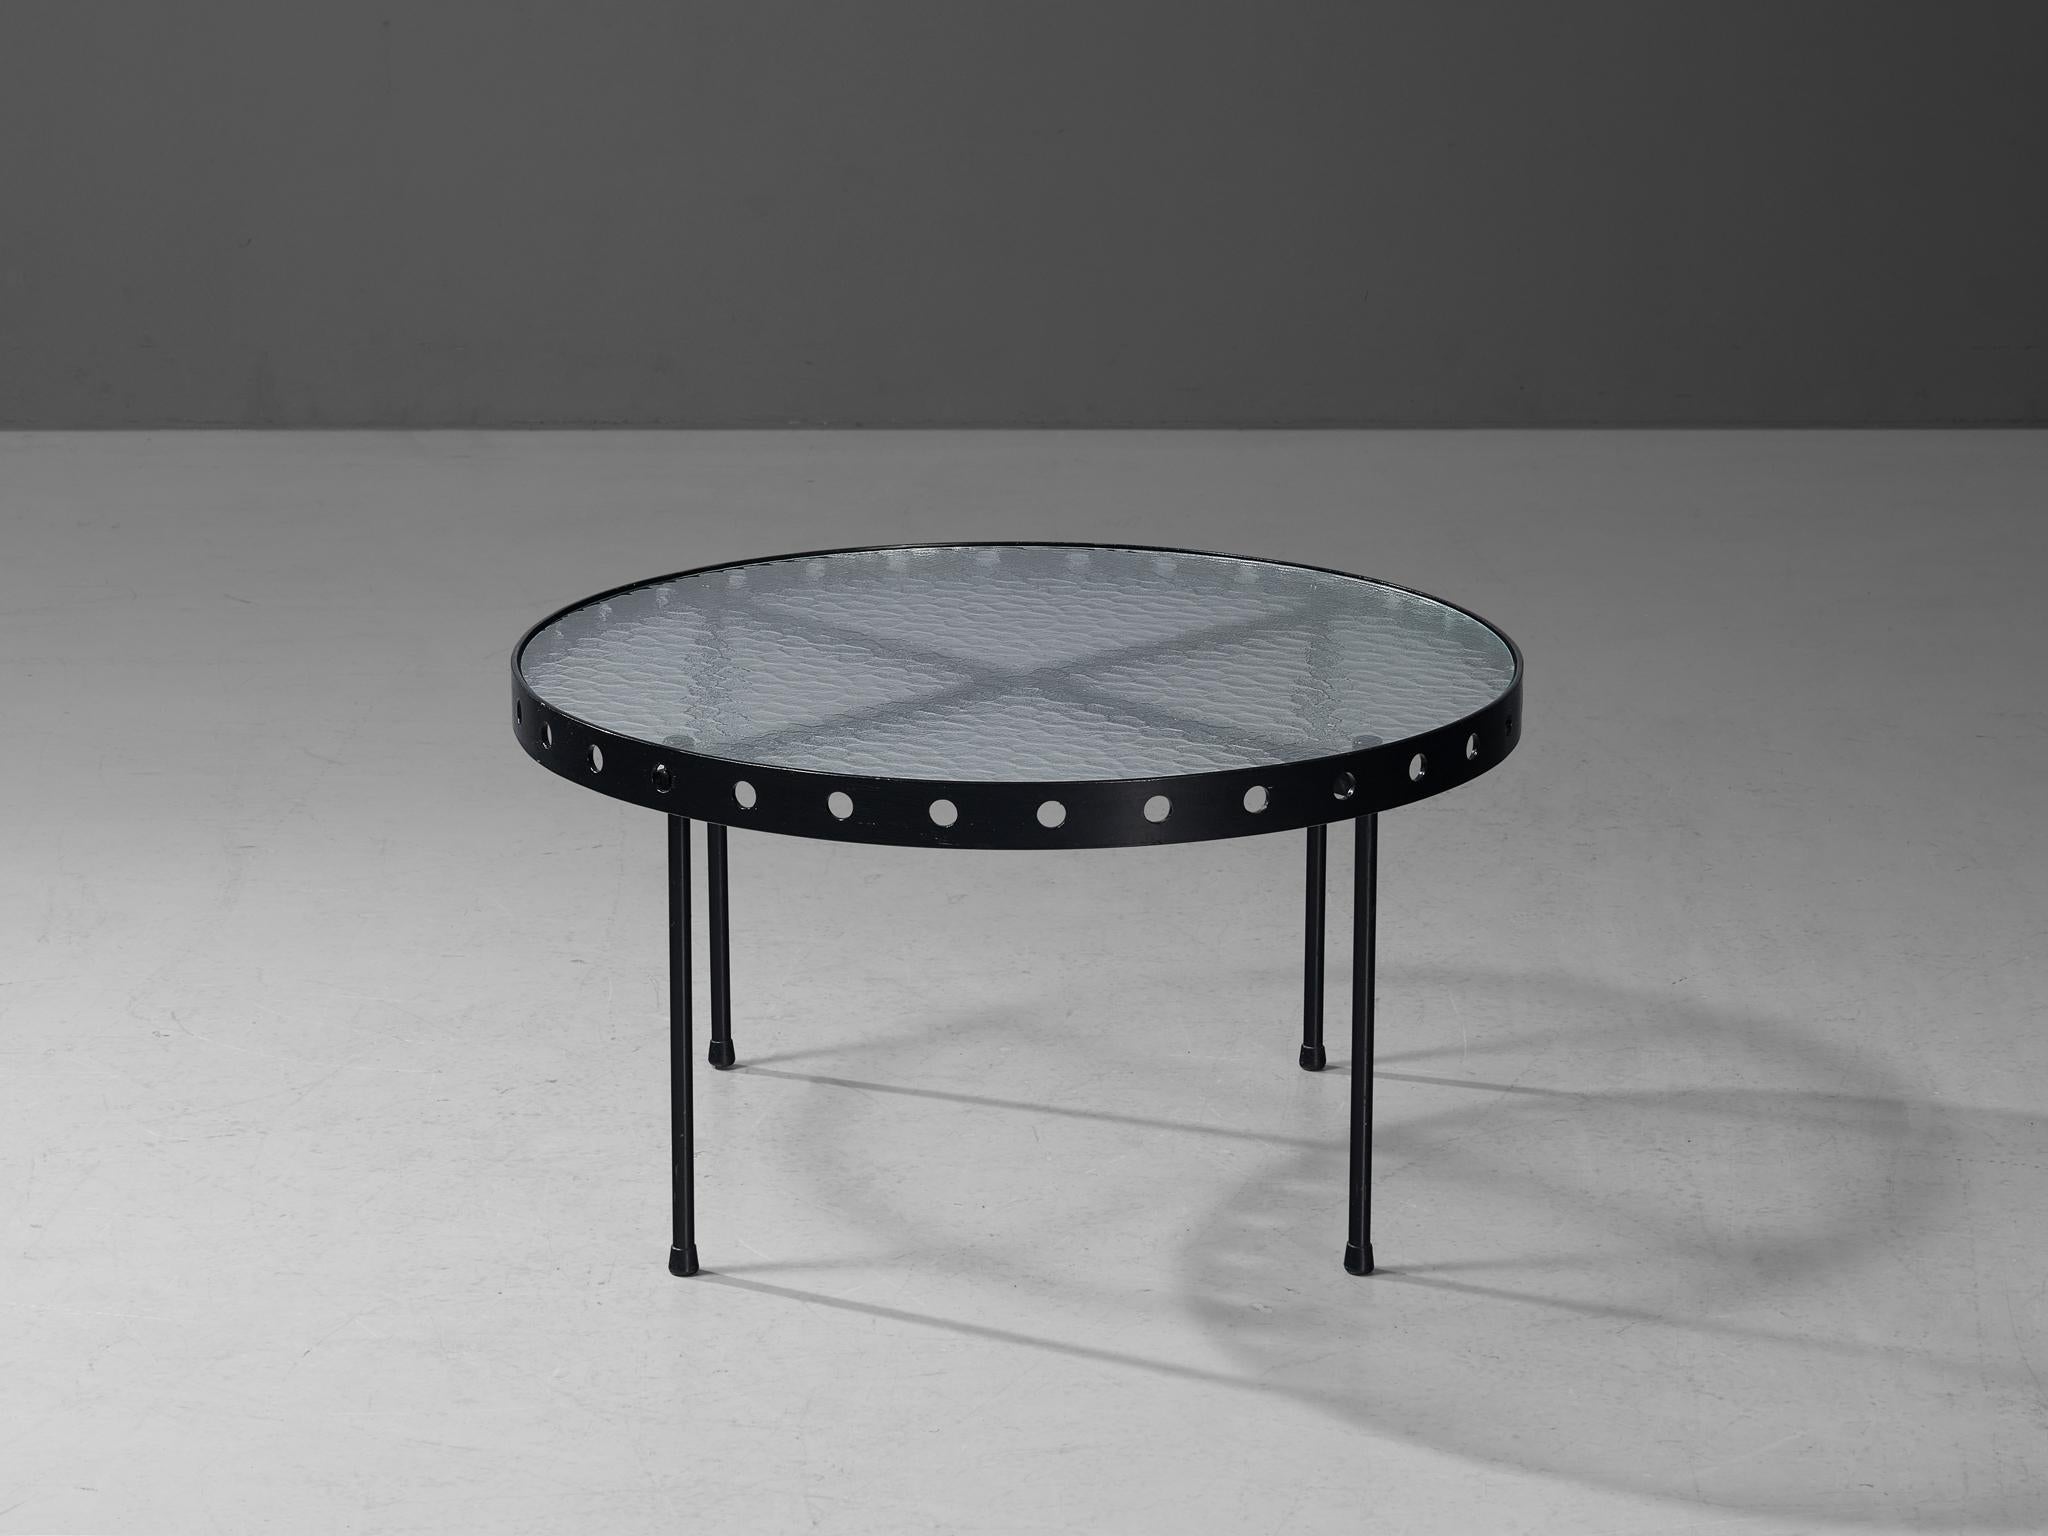 Janni van Pelt, coffee table, enameled metal, textured glass, plastic, The Netherlands, 1950s

This unique coffee table by Janni van Pelt features a round textured glass top with a coated metal border in black that is finished with evenly spaced